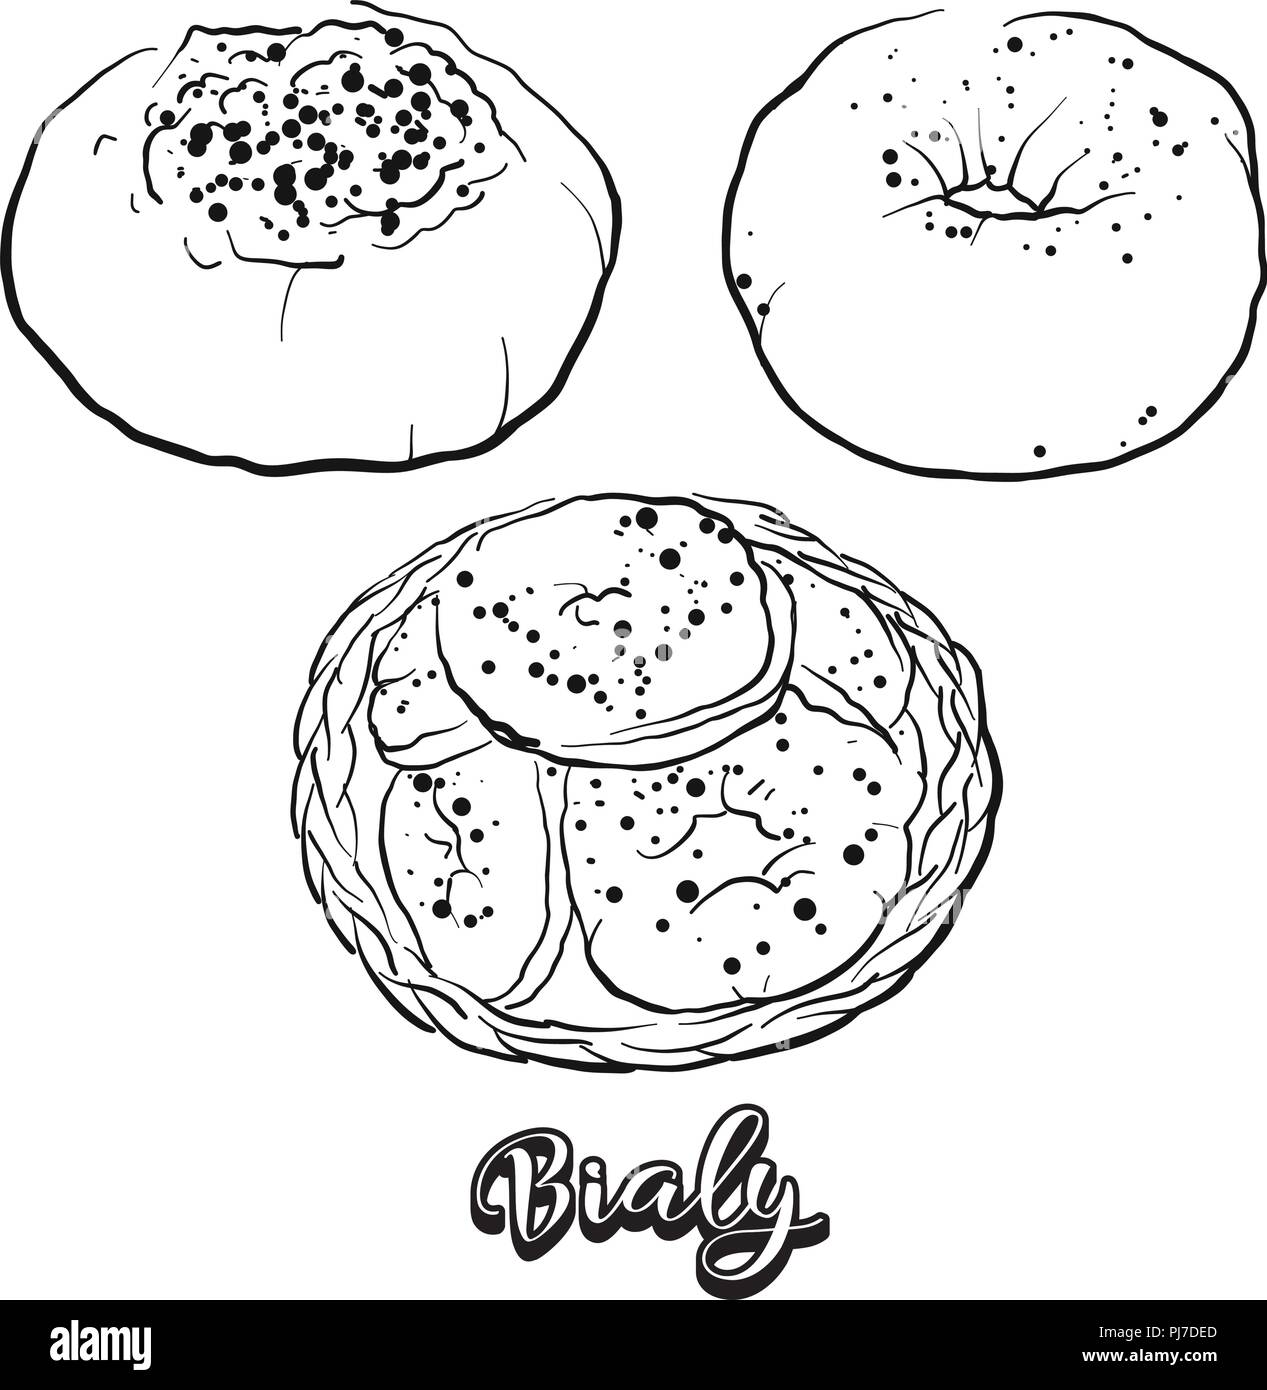 Hand drawn sketch of Bialy bread. Vector drawing of Yeast bread food, usually known in Central Europe. Bread illustration series. Stock Vector